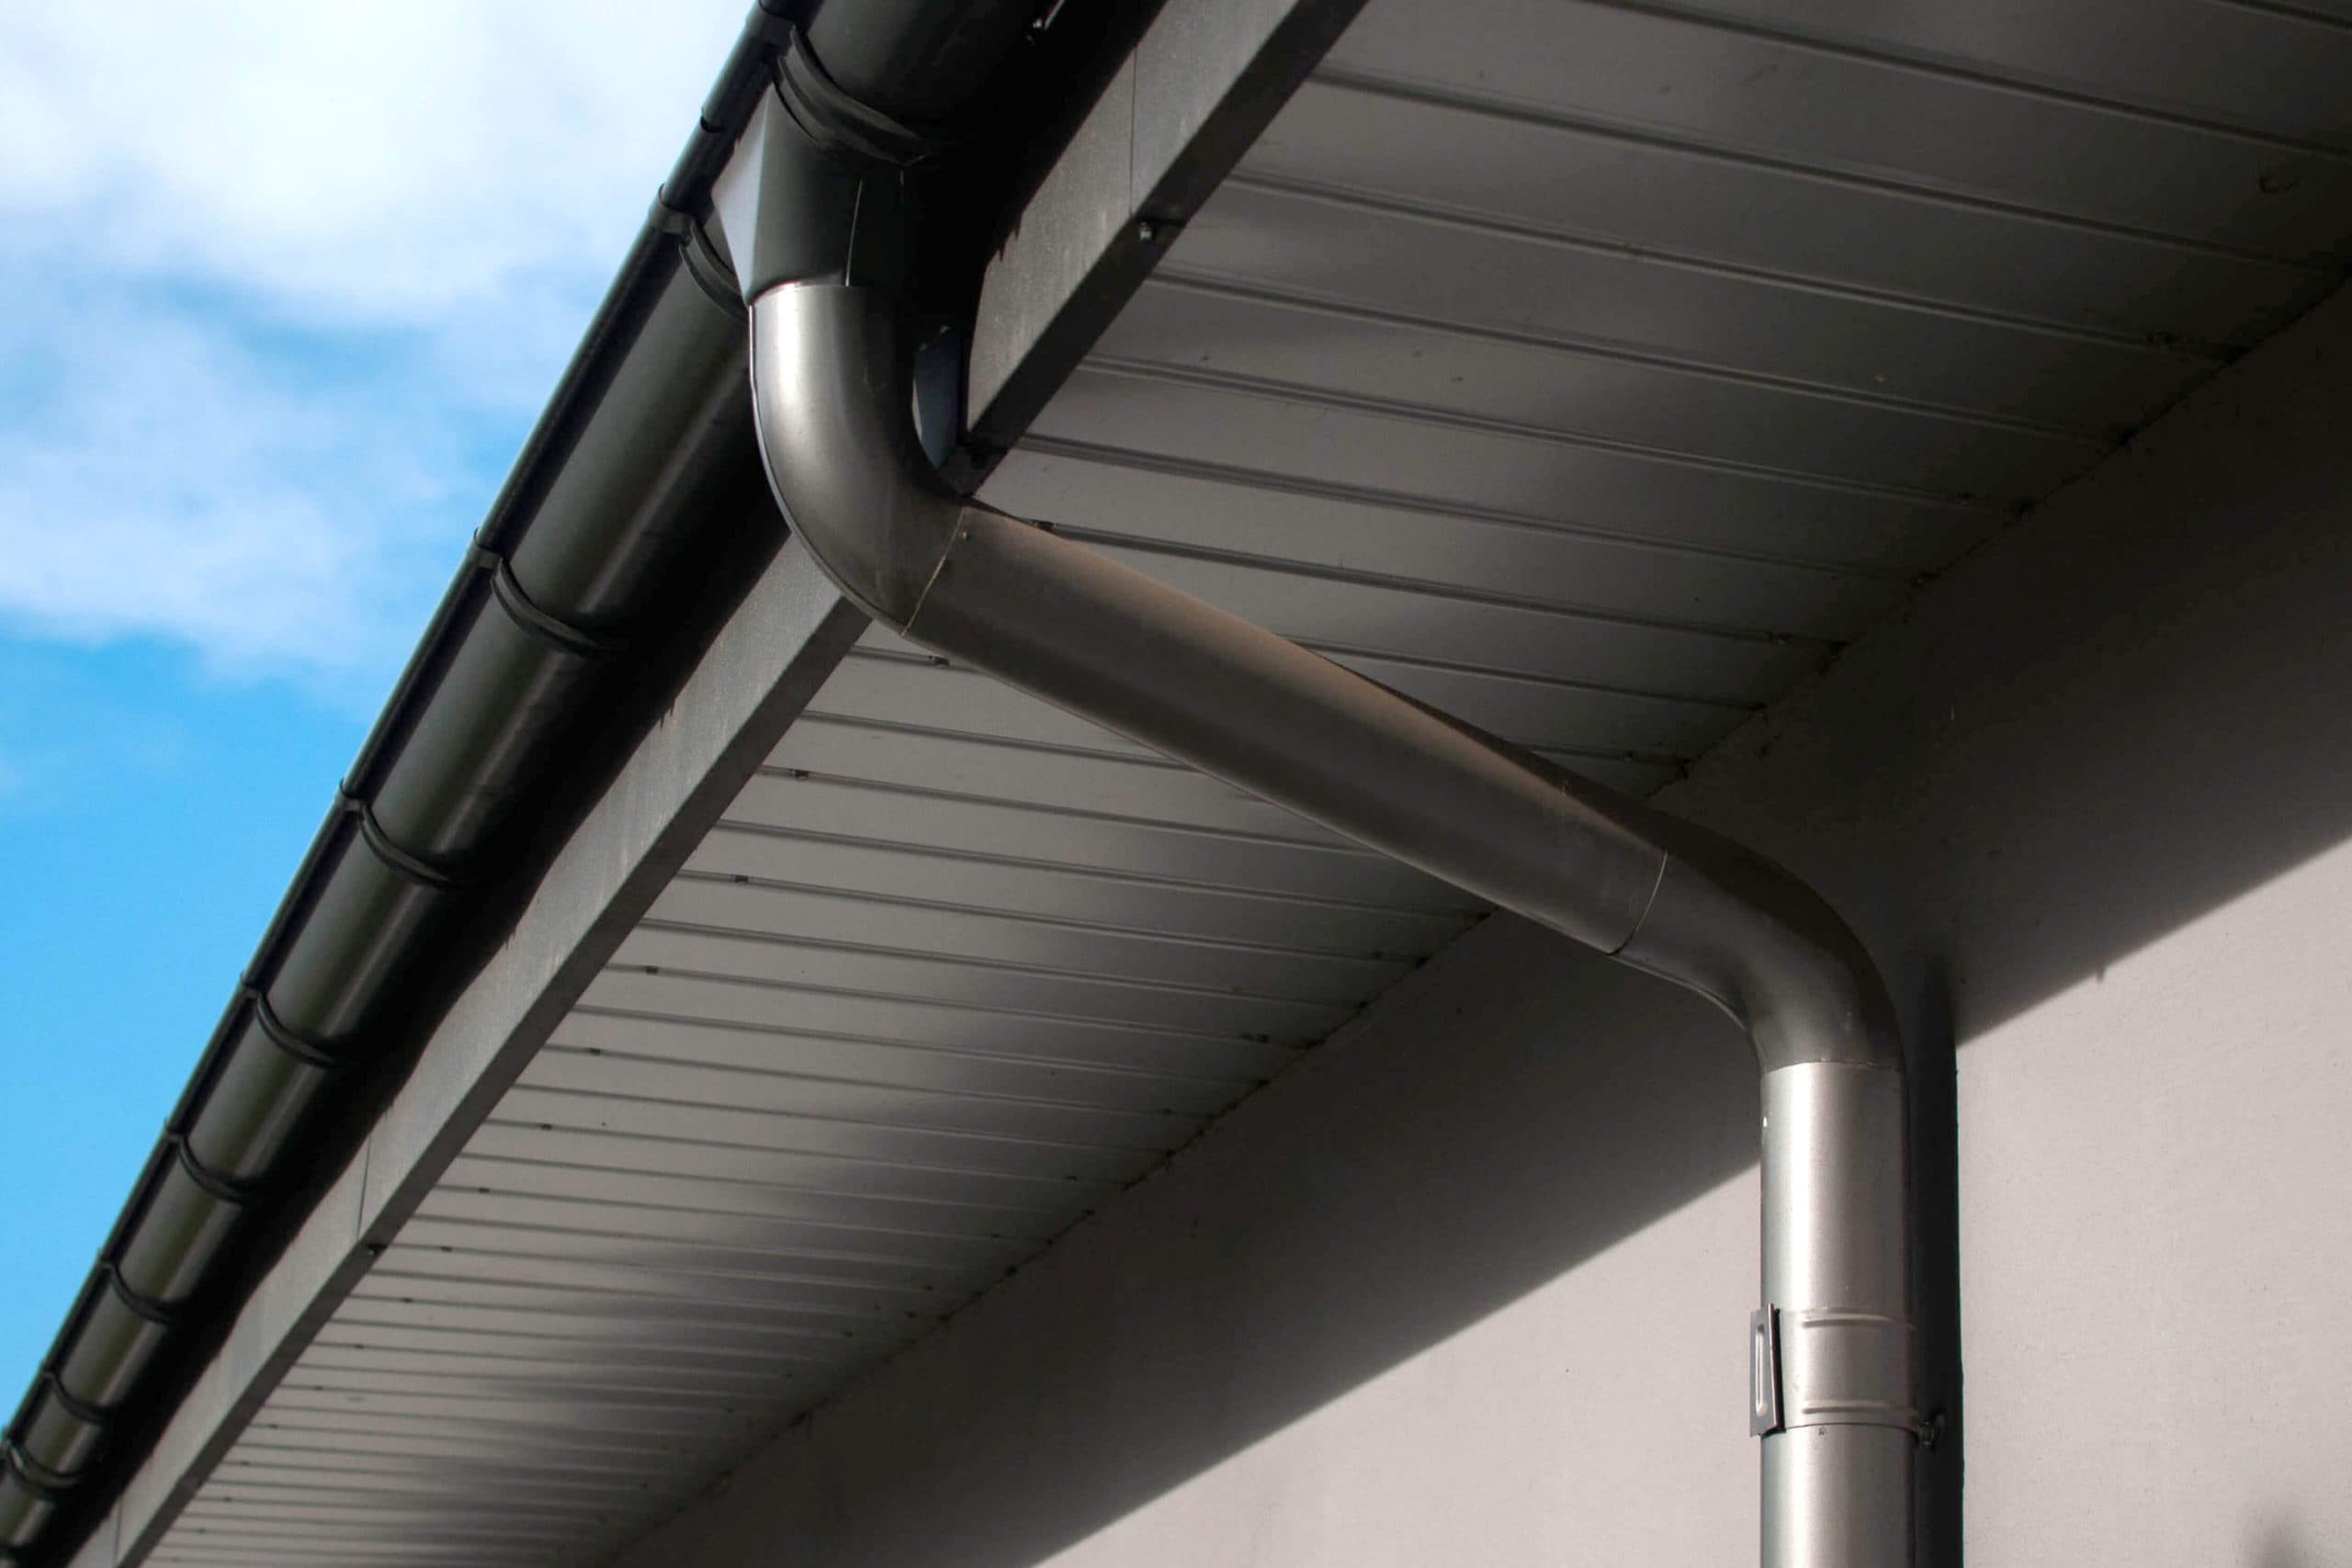 Reliable and affordable Galvanized gutters installation in Atlanta